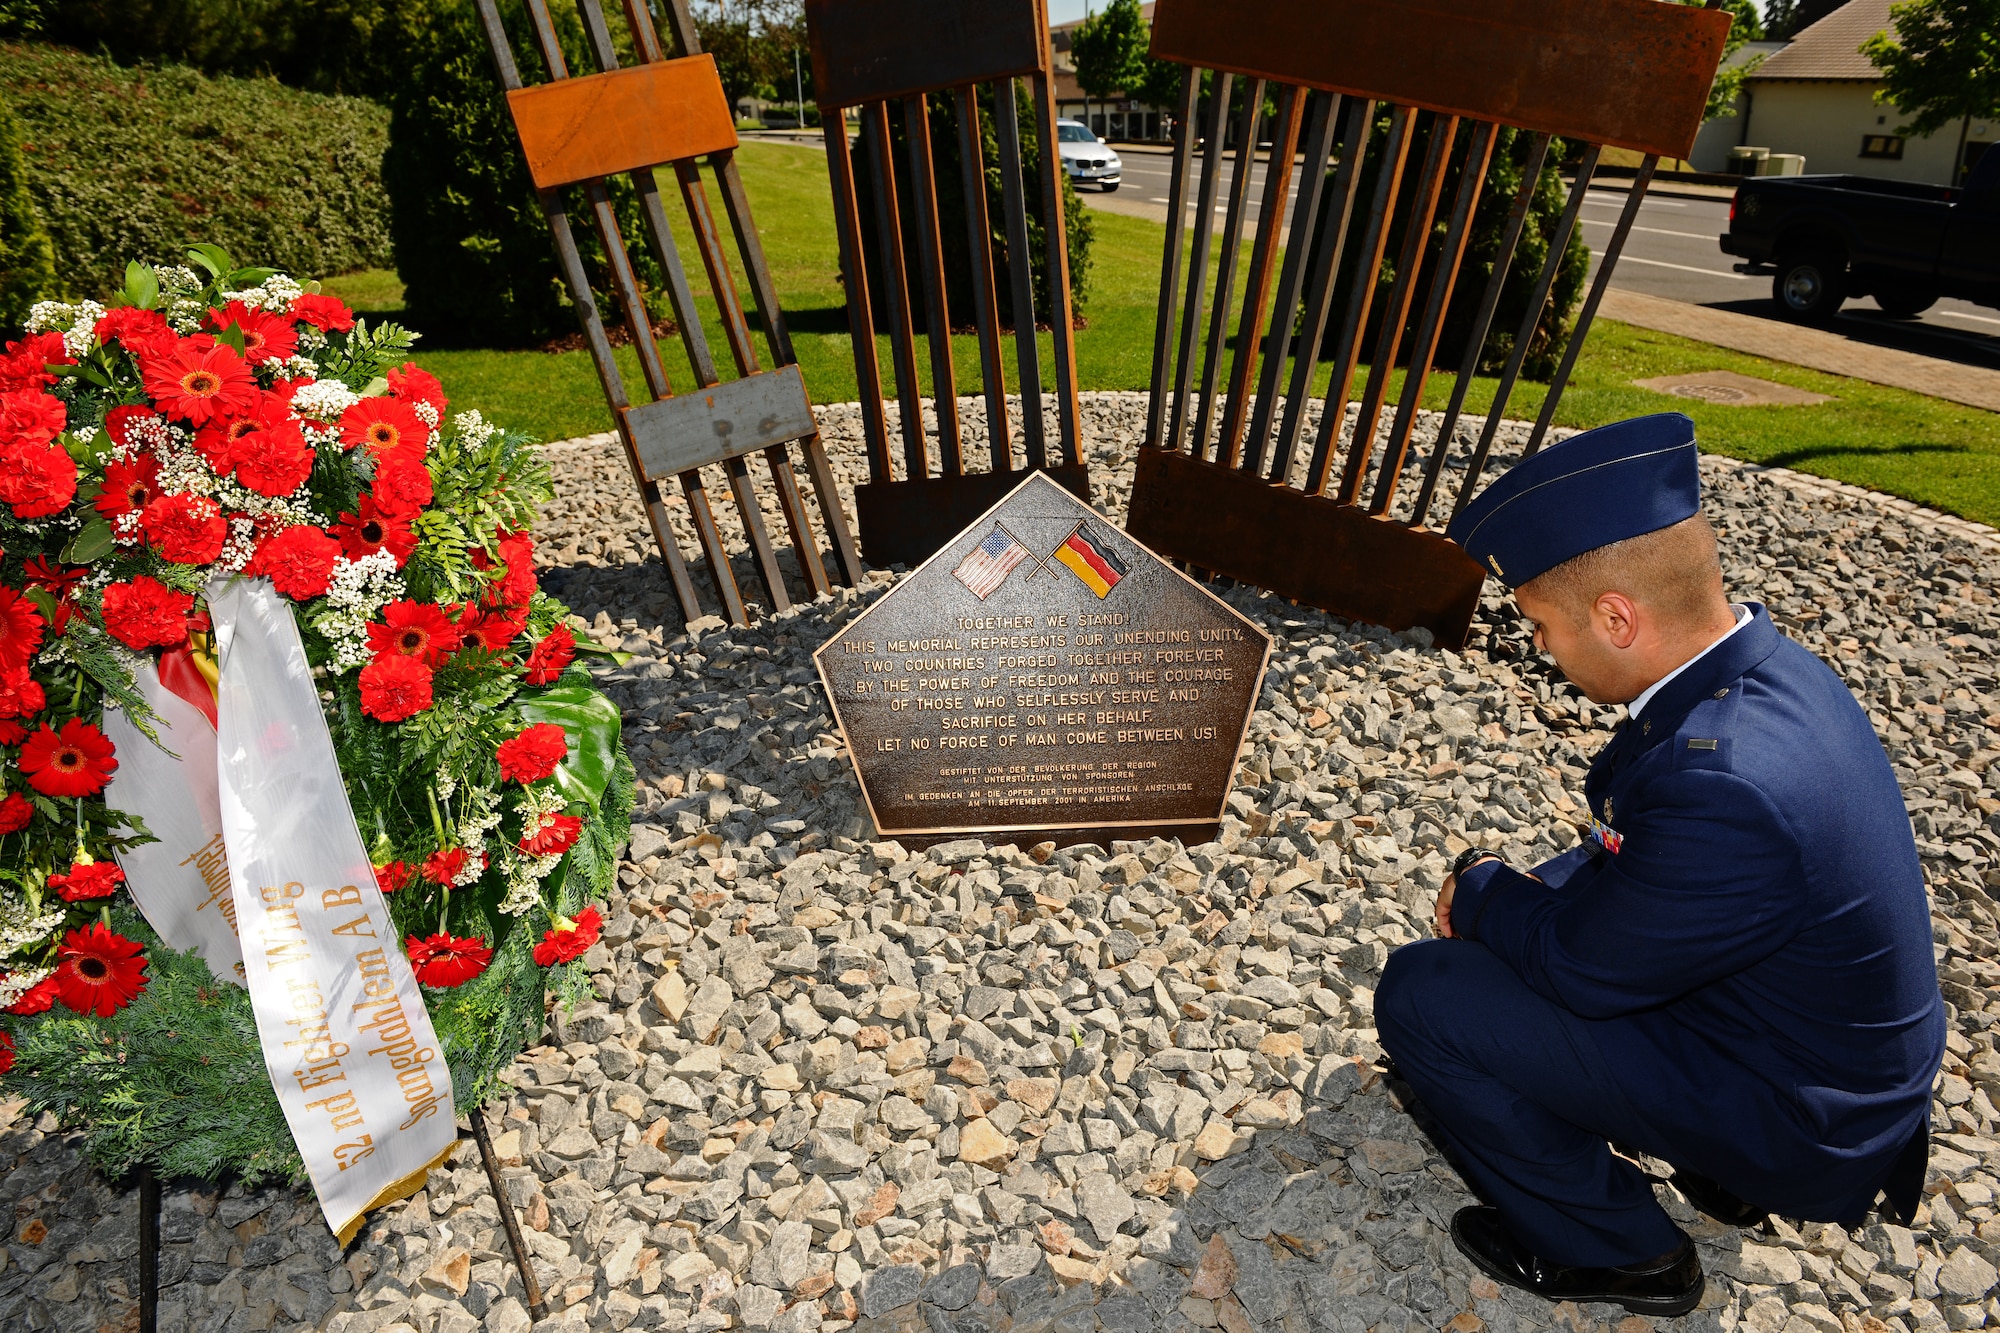 SPANGDAHLEM AIR BASE, Germany – 2nd Lt. Jeffrey Rodriguez, 81st Aircraft Maintenance Unit assistant officer in charge, kneels to pay respect to those who died in the 9/11 attacks after the memorial dedication ceremony here May 25. The 9/11 memorial was donated to the 52nd Fighter Wing by the Host Nation Council Spangdahlem and local businesses.  The sculpture was designed by Hubert Kruft, artist, from Niederpruem. (U.S. Air Force photo by Airman 1st Class Matthew B. Fredericks/Released)